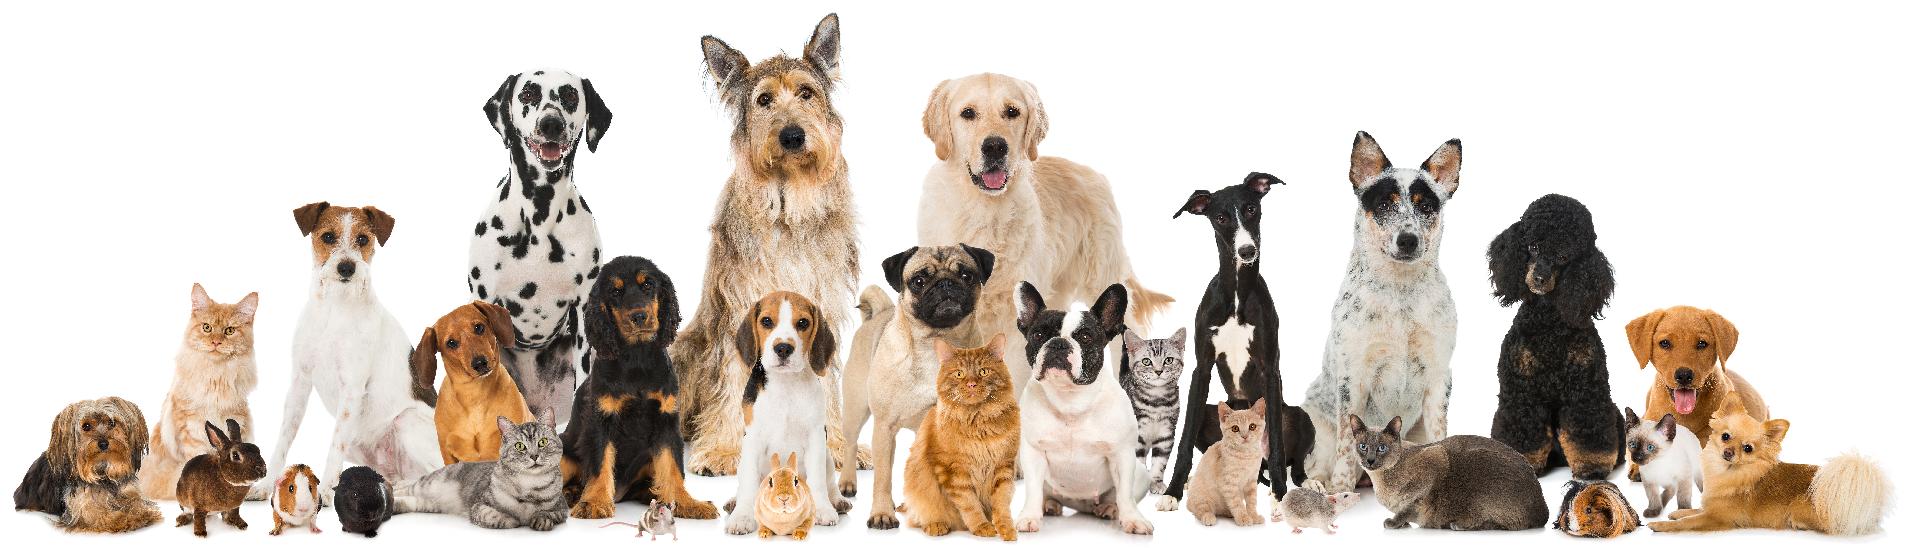 Pet population and prospects for the pet food market of the region